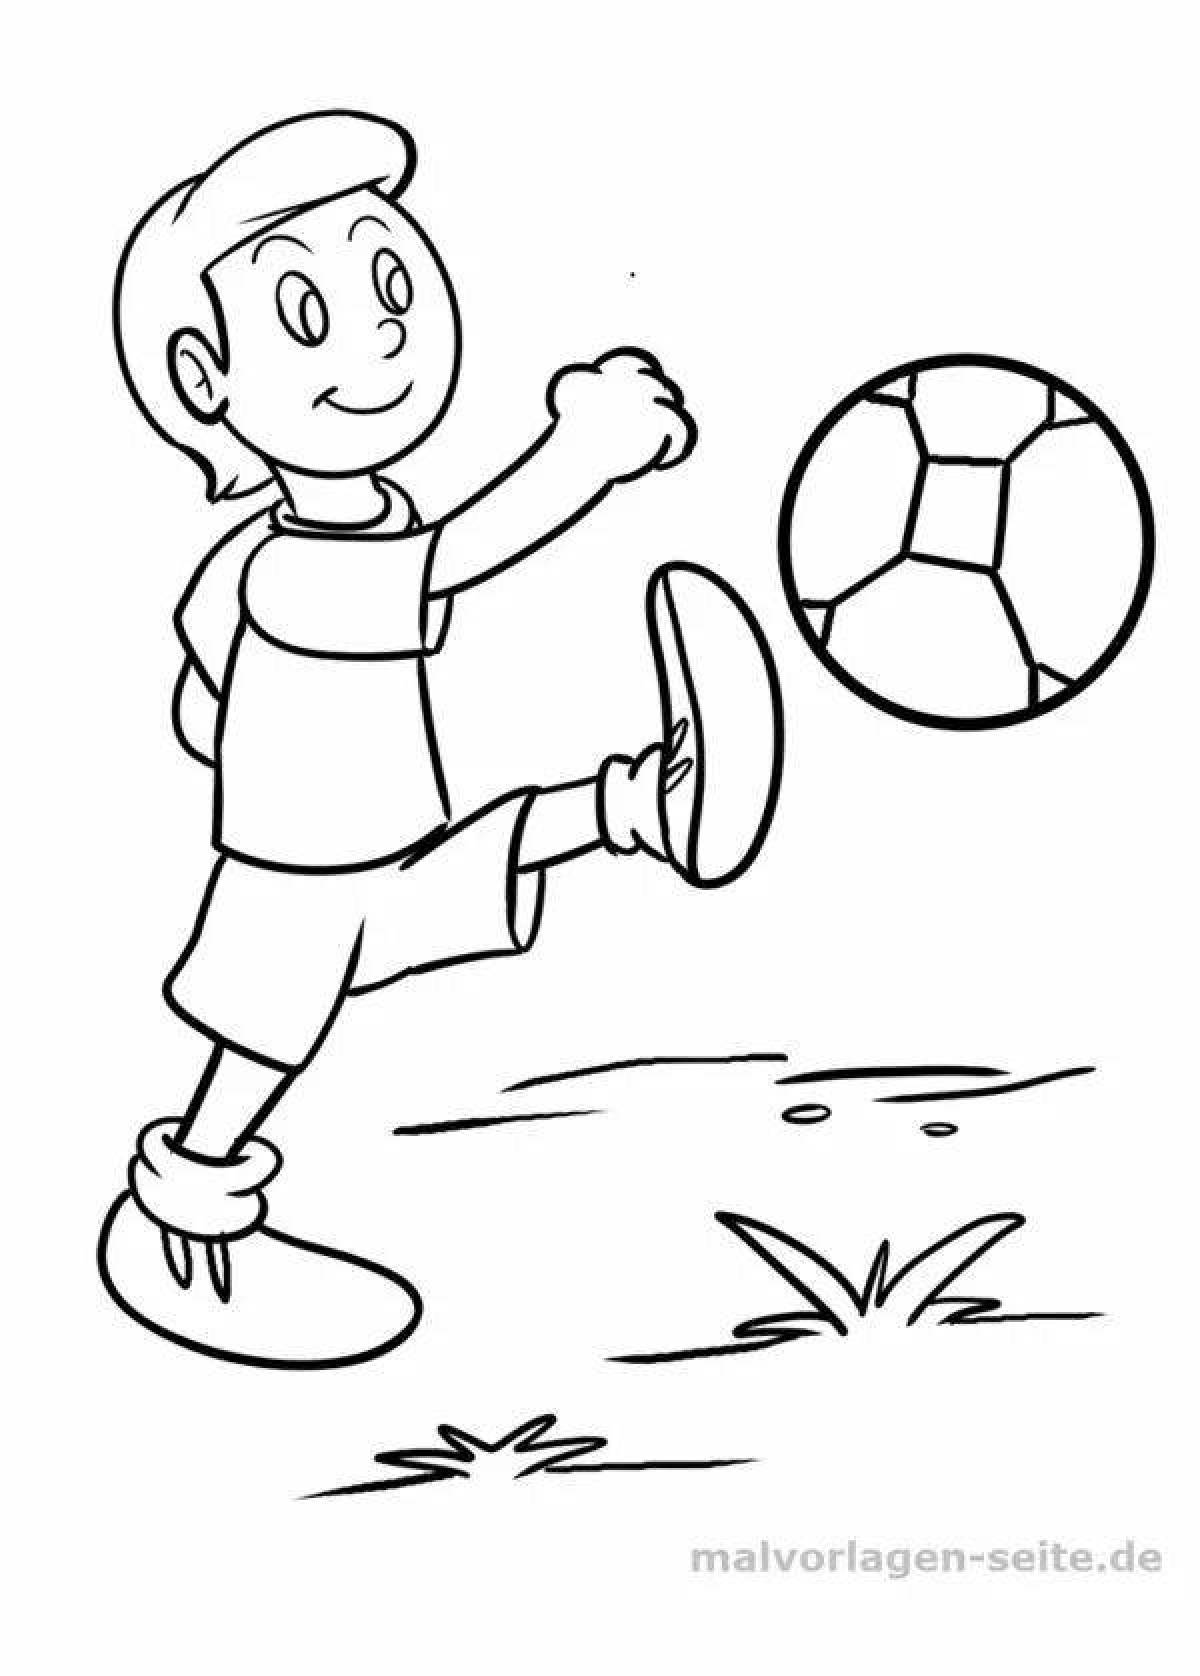 Animated sports coloring pages for kids